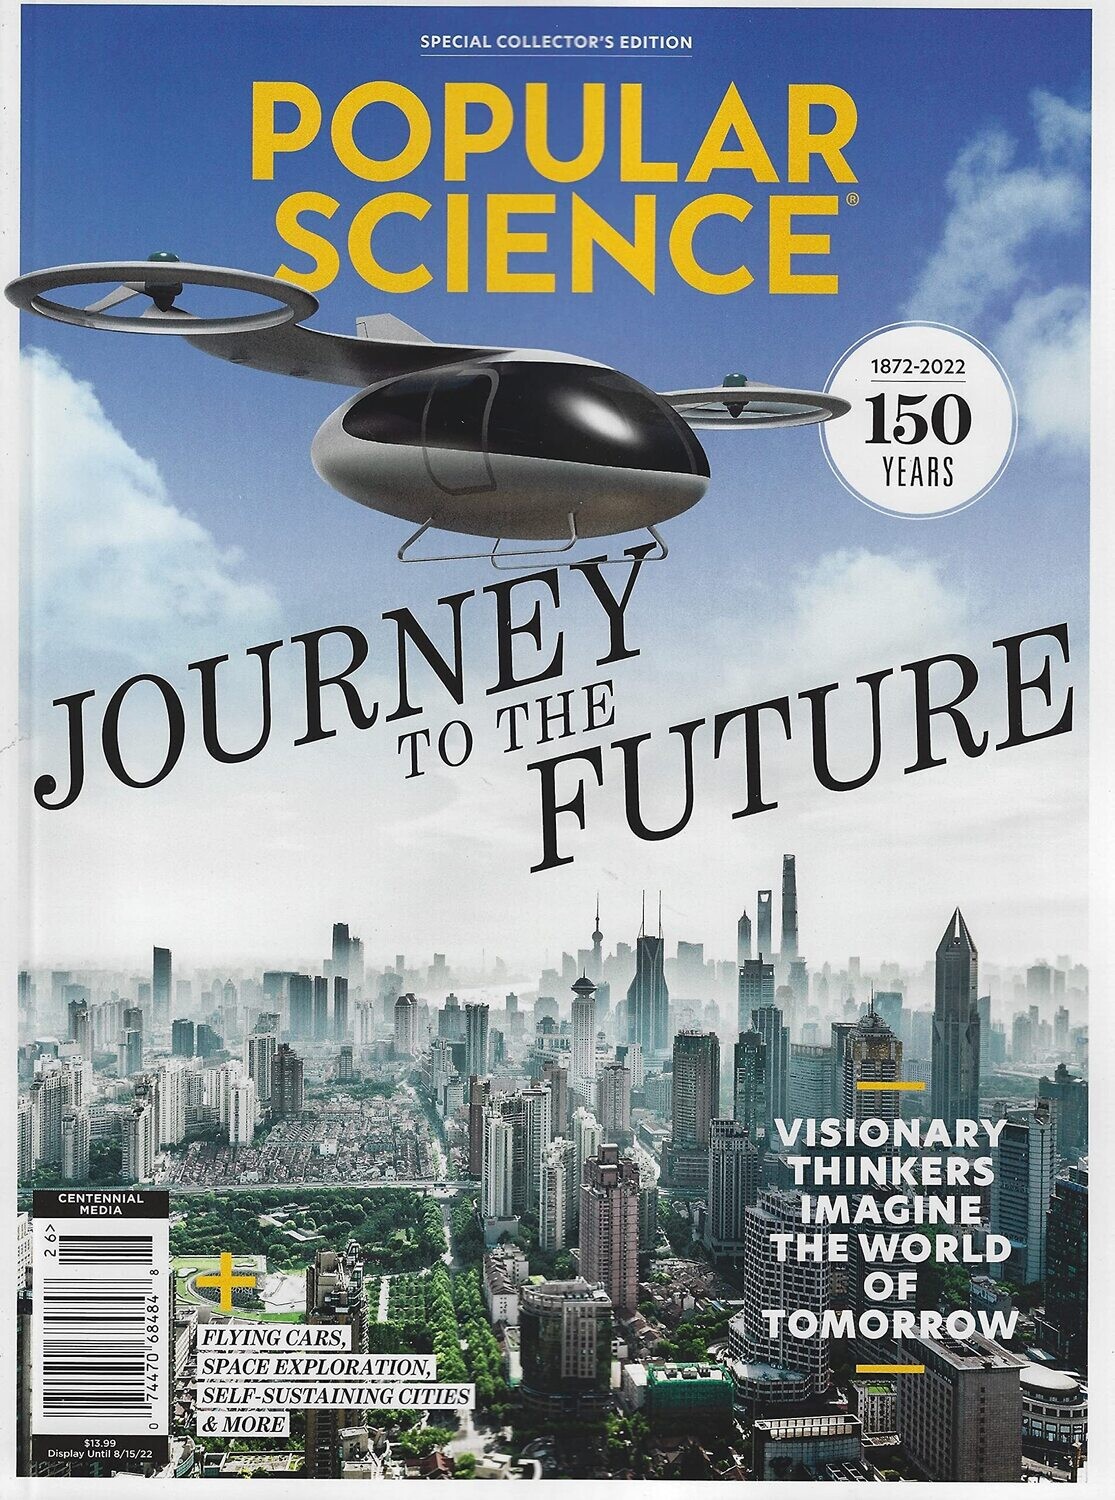 Journey to the Future-Popular Science Special 2022